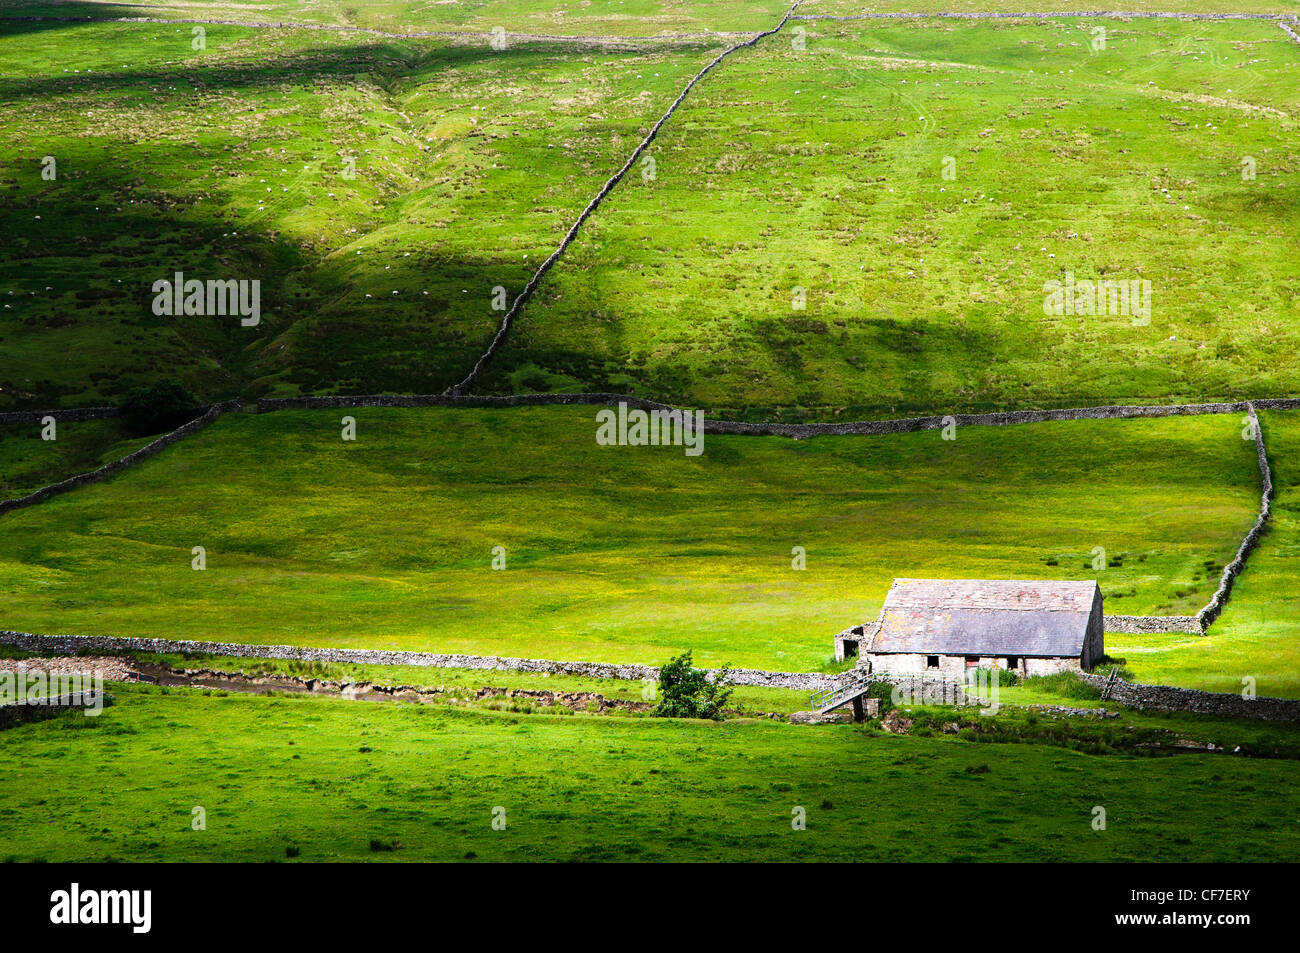 High angle view of farmhouse in agricultural field, Yorkshire-Dales region in North-England, Great Britain, Europe Stock Photo